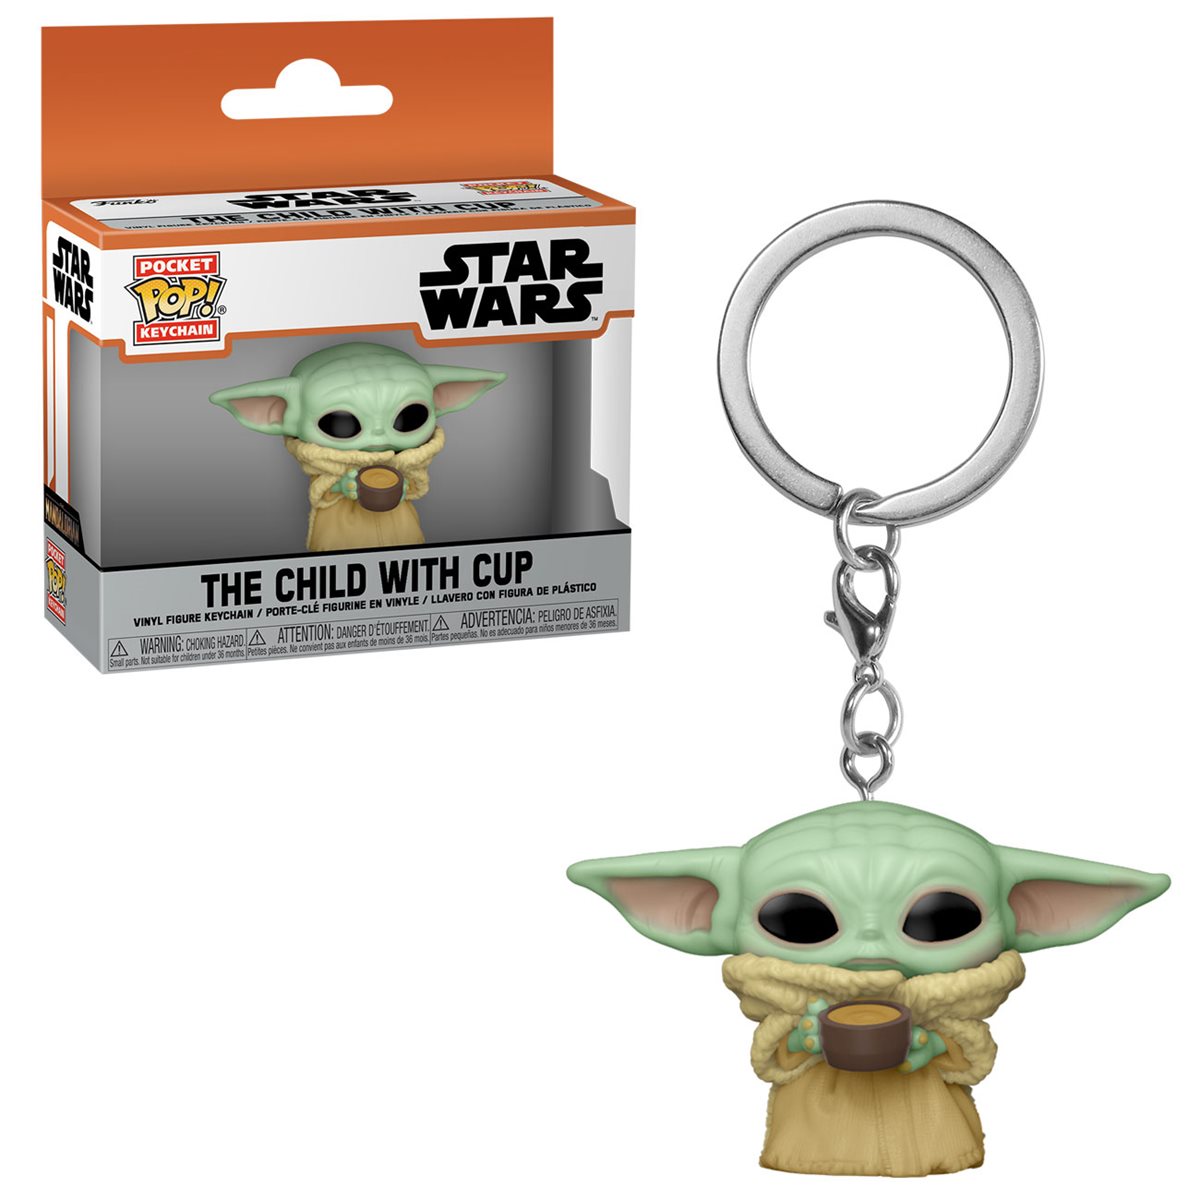 Funko Pocket POP Keychain Star Wars The Child with Cup